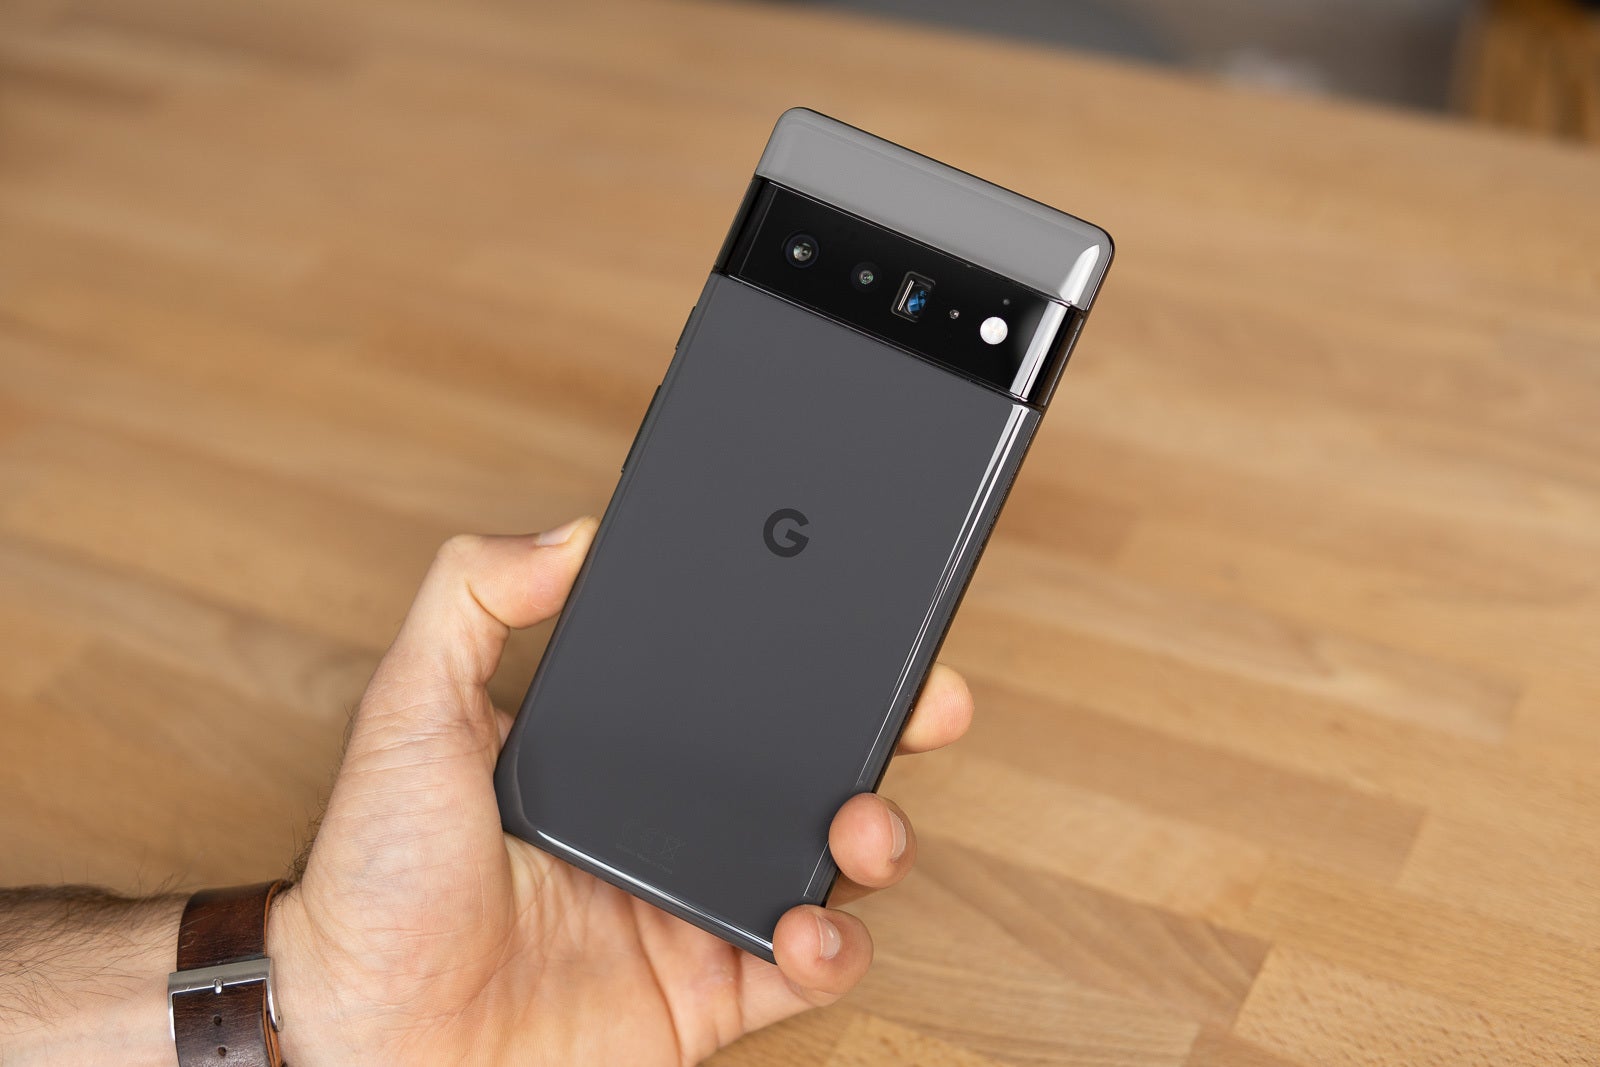 Google Pixel 6 Pro review: The best Android phone money can buy